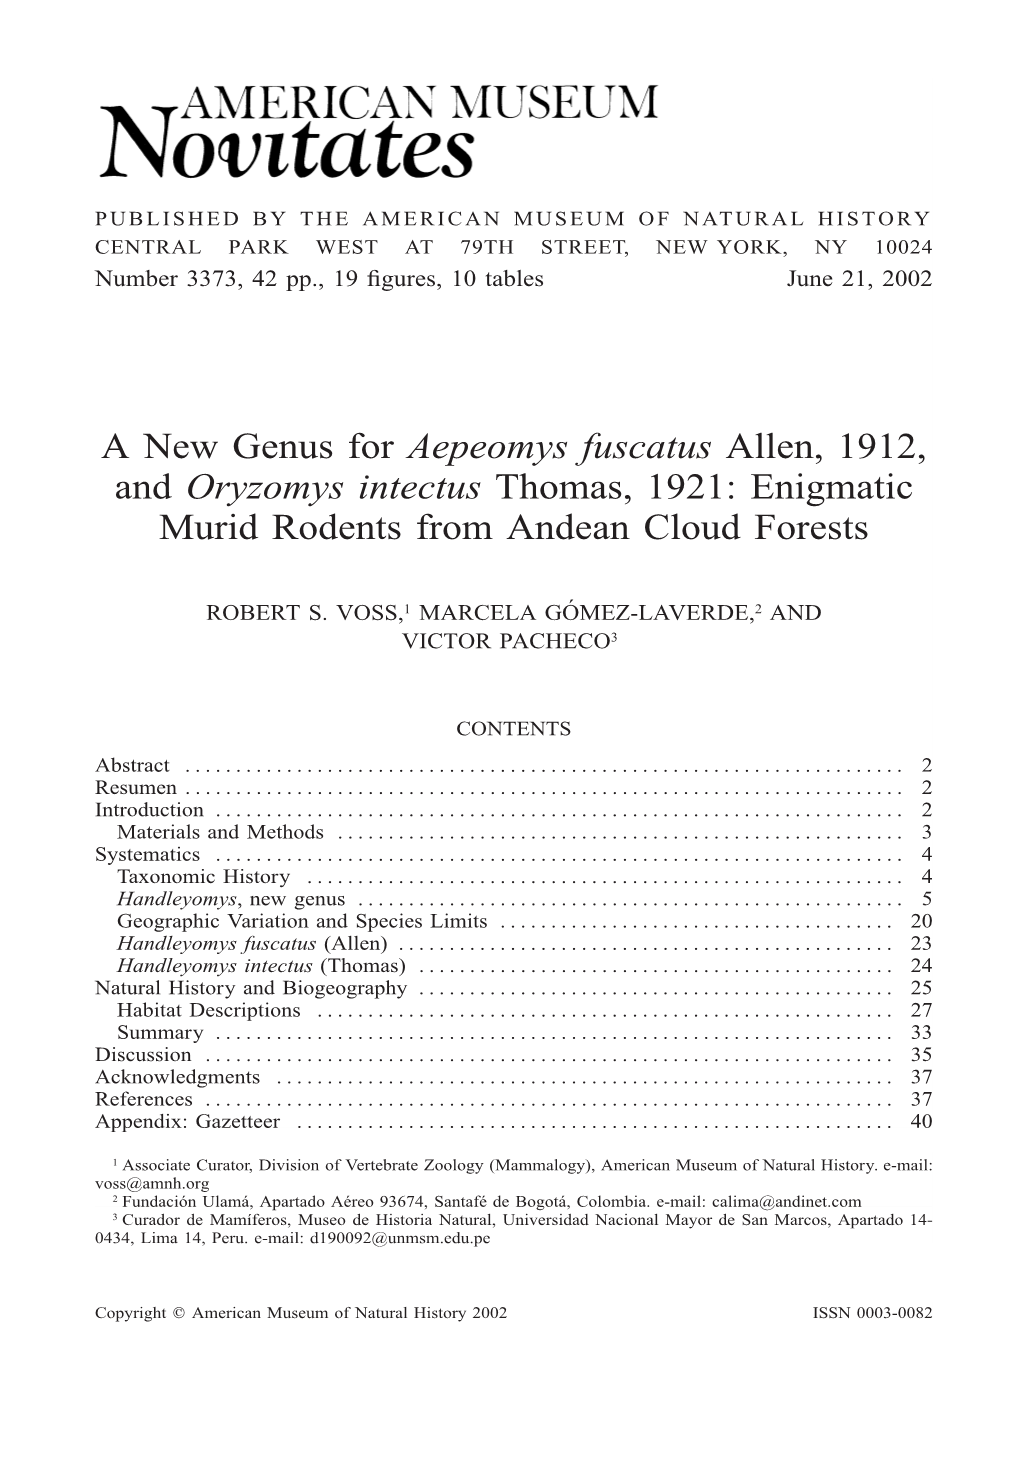 A New Genus for Aepeomys Fuscatus Allen, 1912, and Oryzomys Intectus Thomas, 1921: Enigmatic Murid Rodents from Andean Cloud Forests